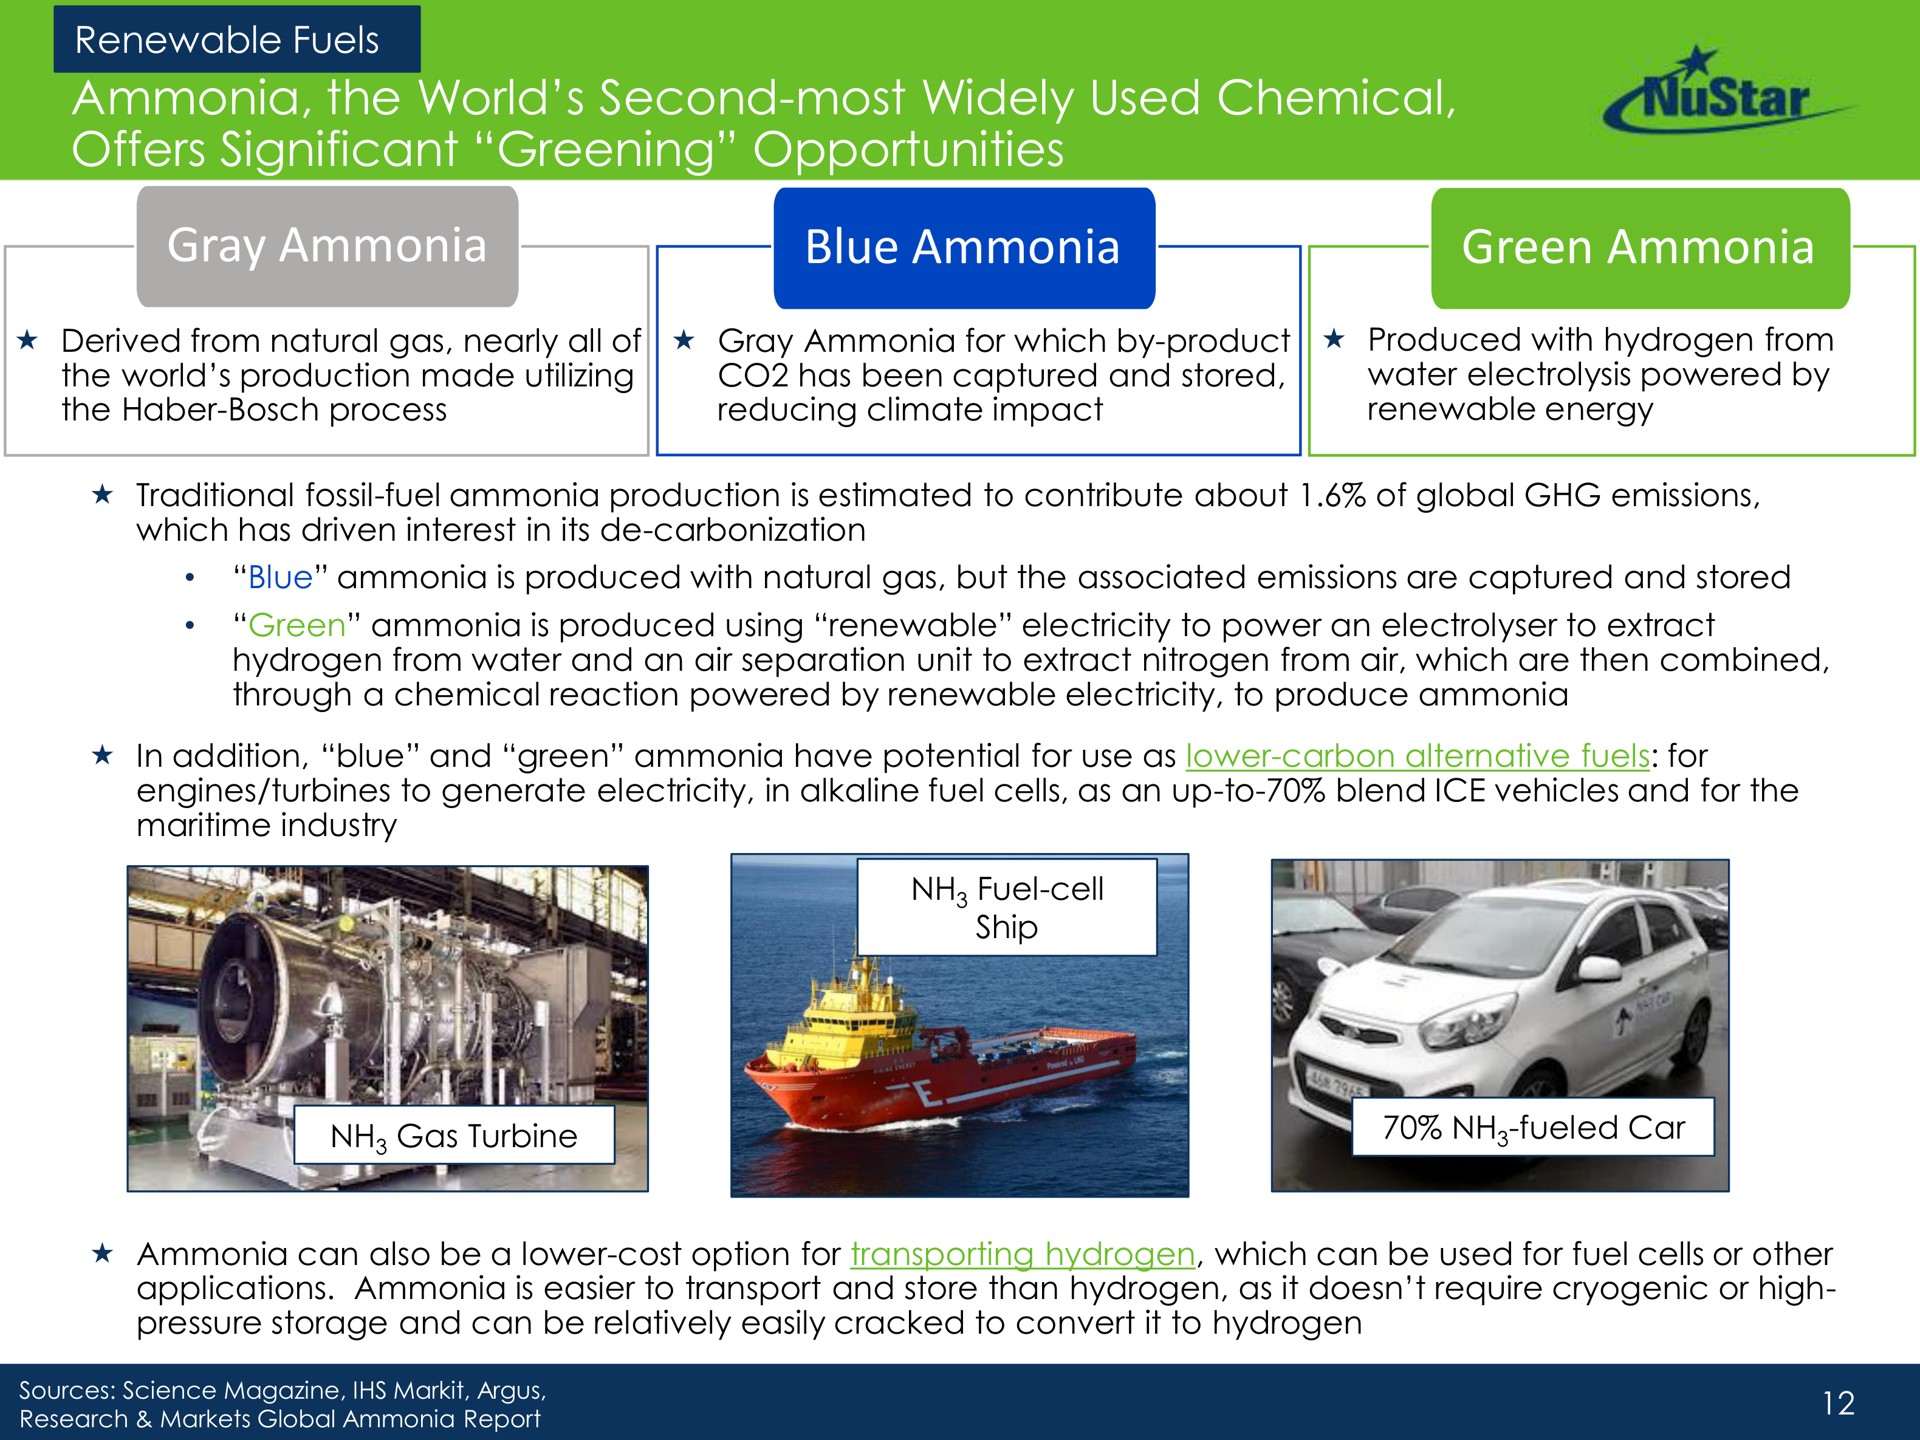 ammonia the world second most widely used chemical offers significant greening opportunities gray ammonia blue ammonia green ammonia | NuStar Energy